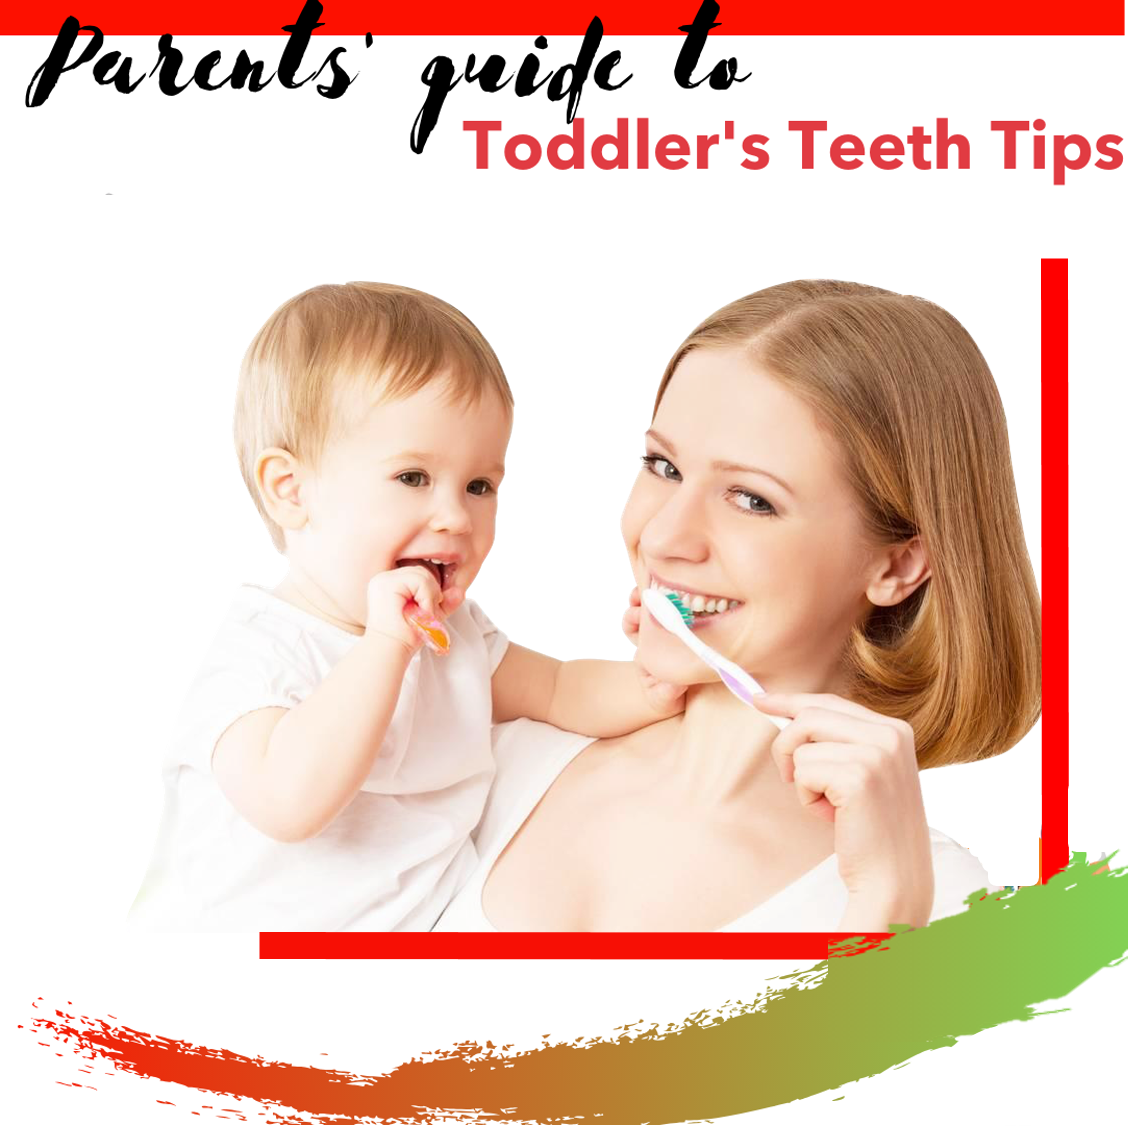 parents guide to Toddler 's teeth tips